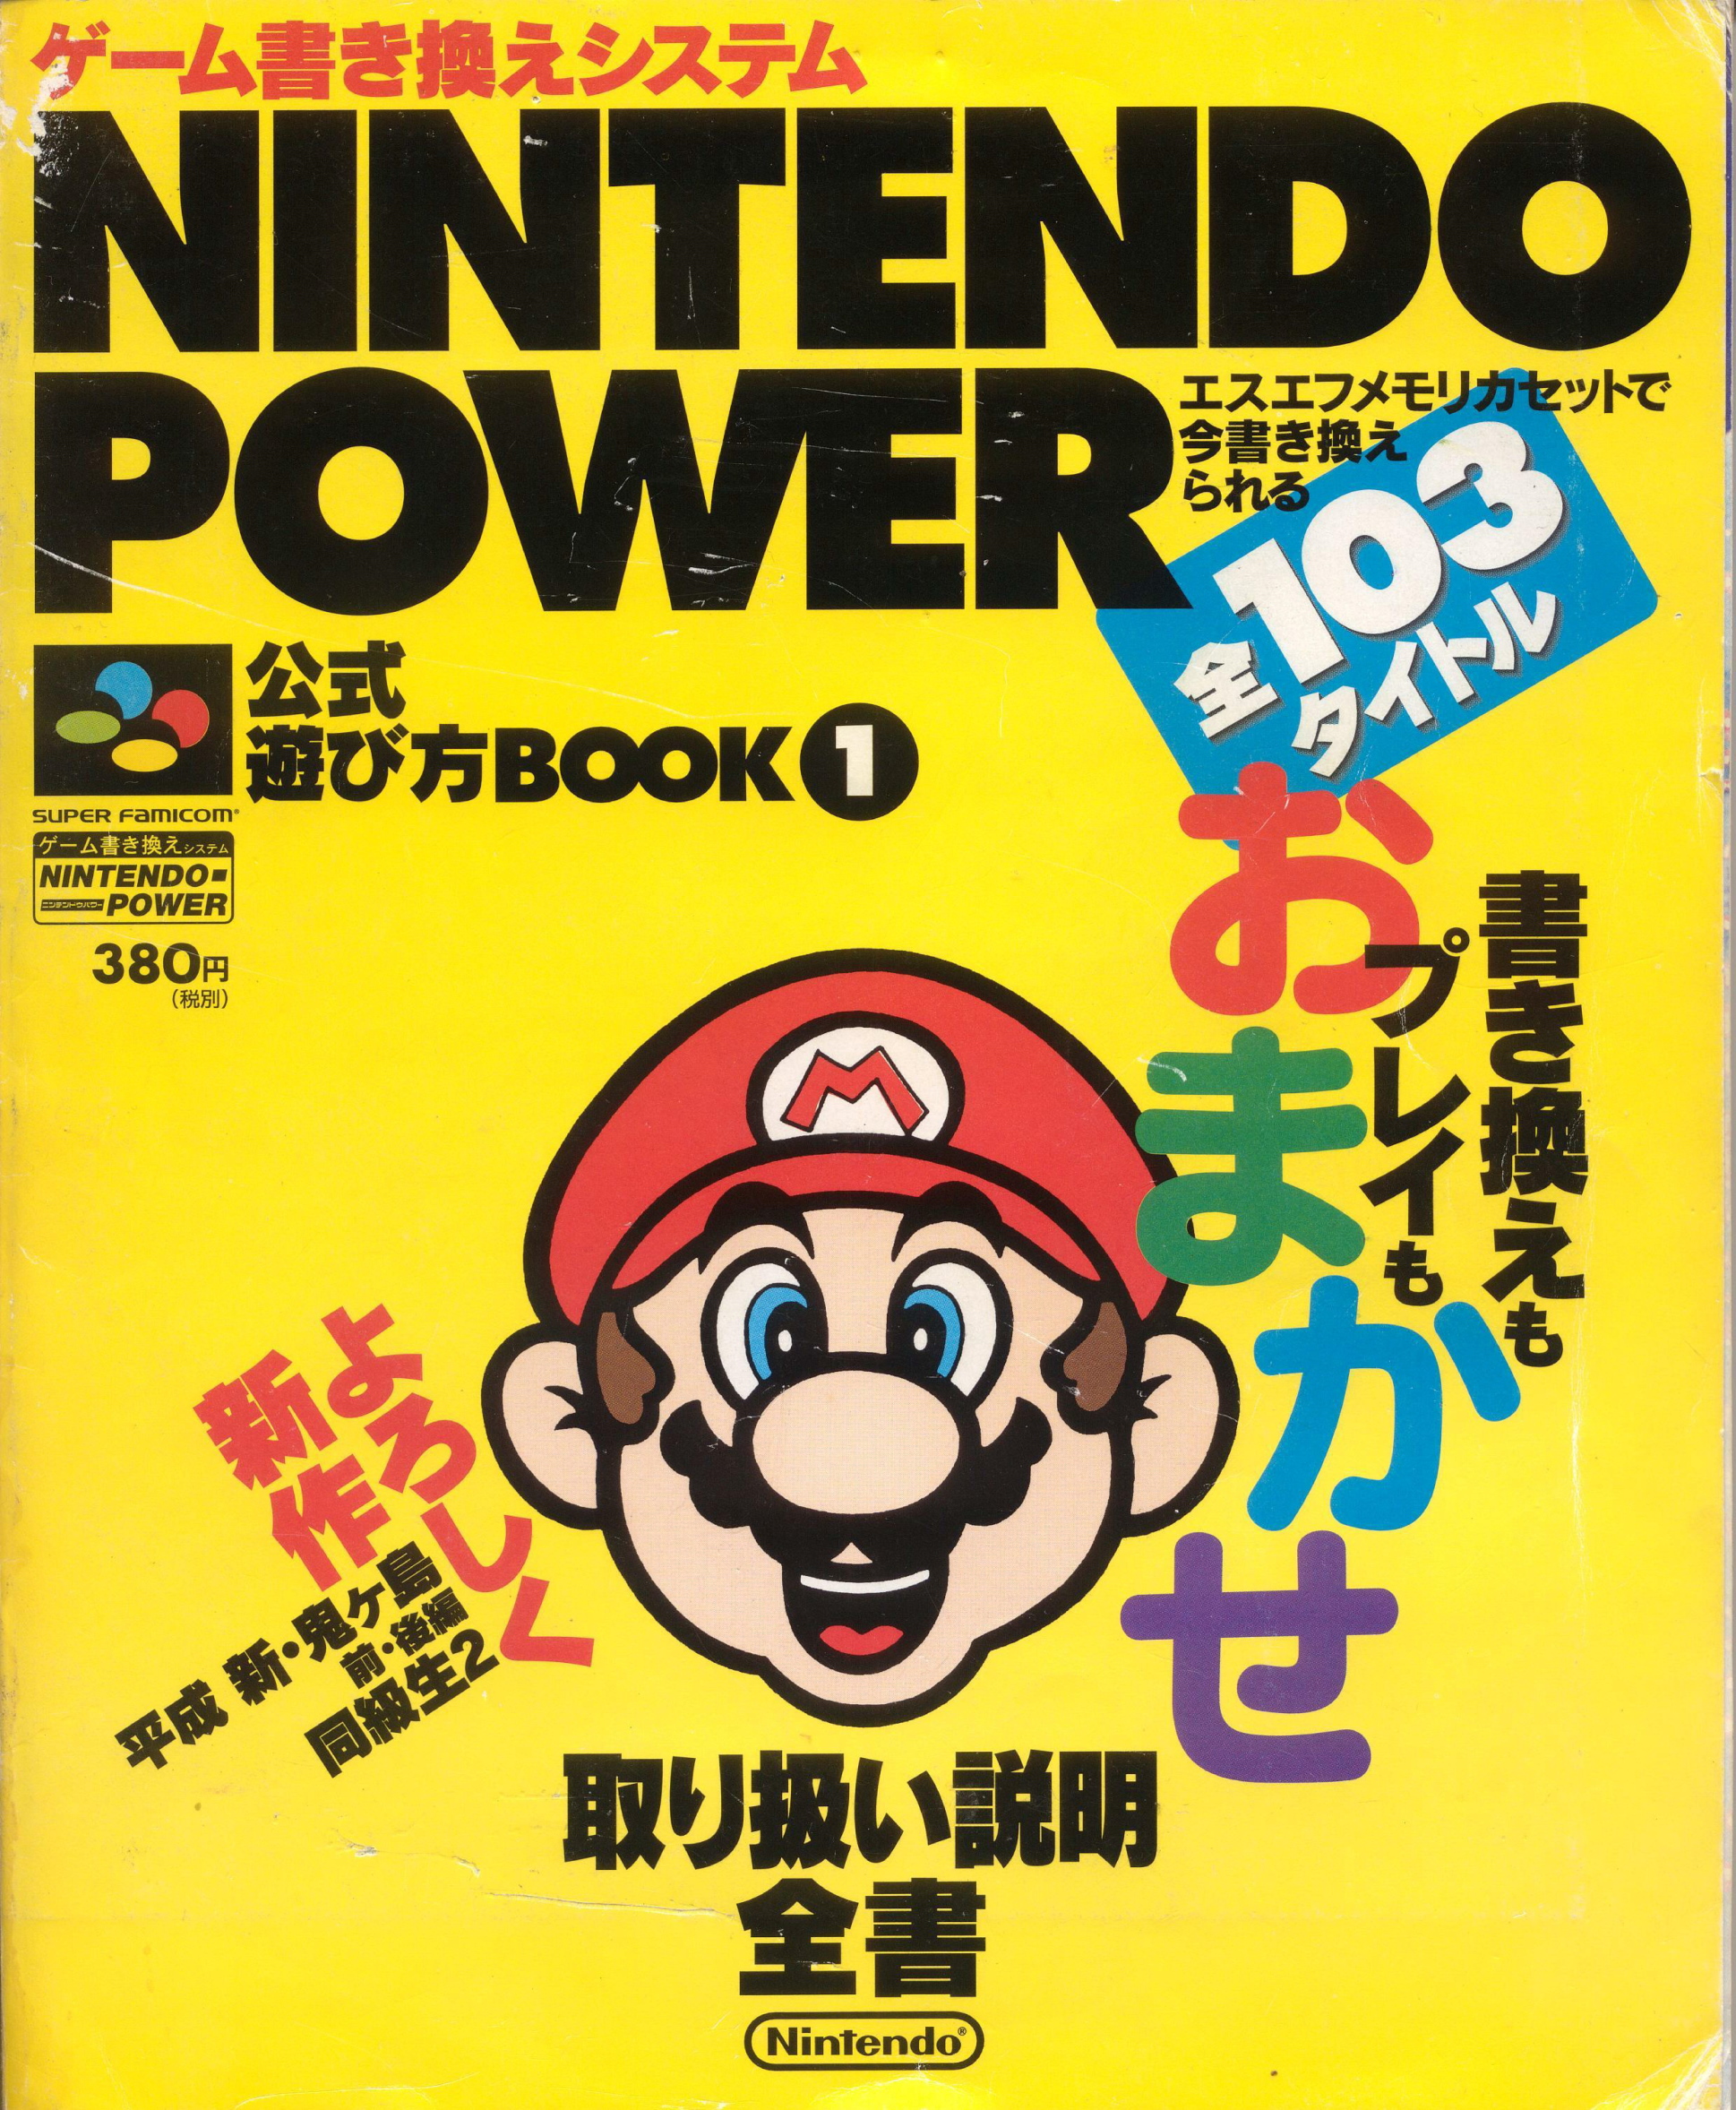 Nintendo Power Cartridge Manual Scanning Project Complete